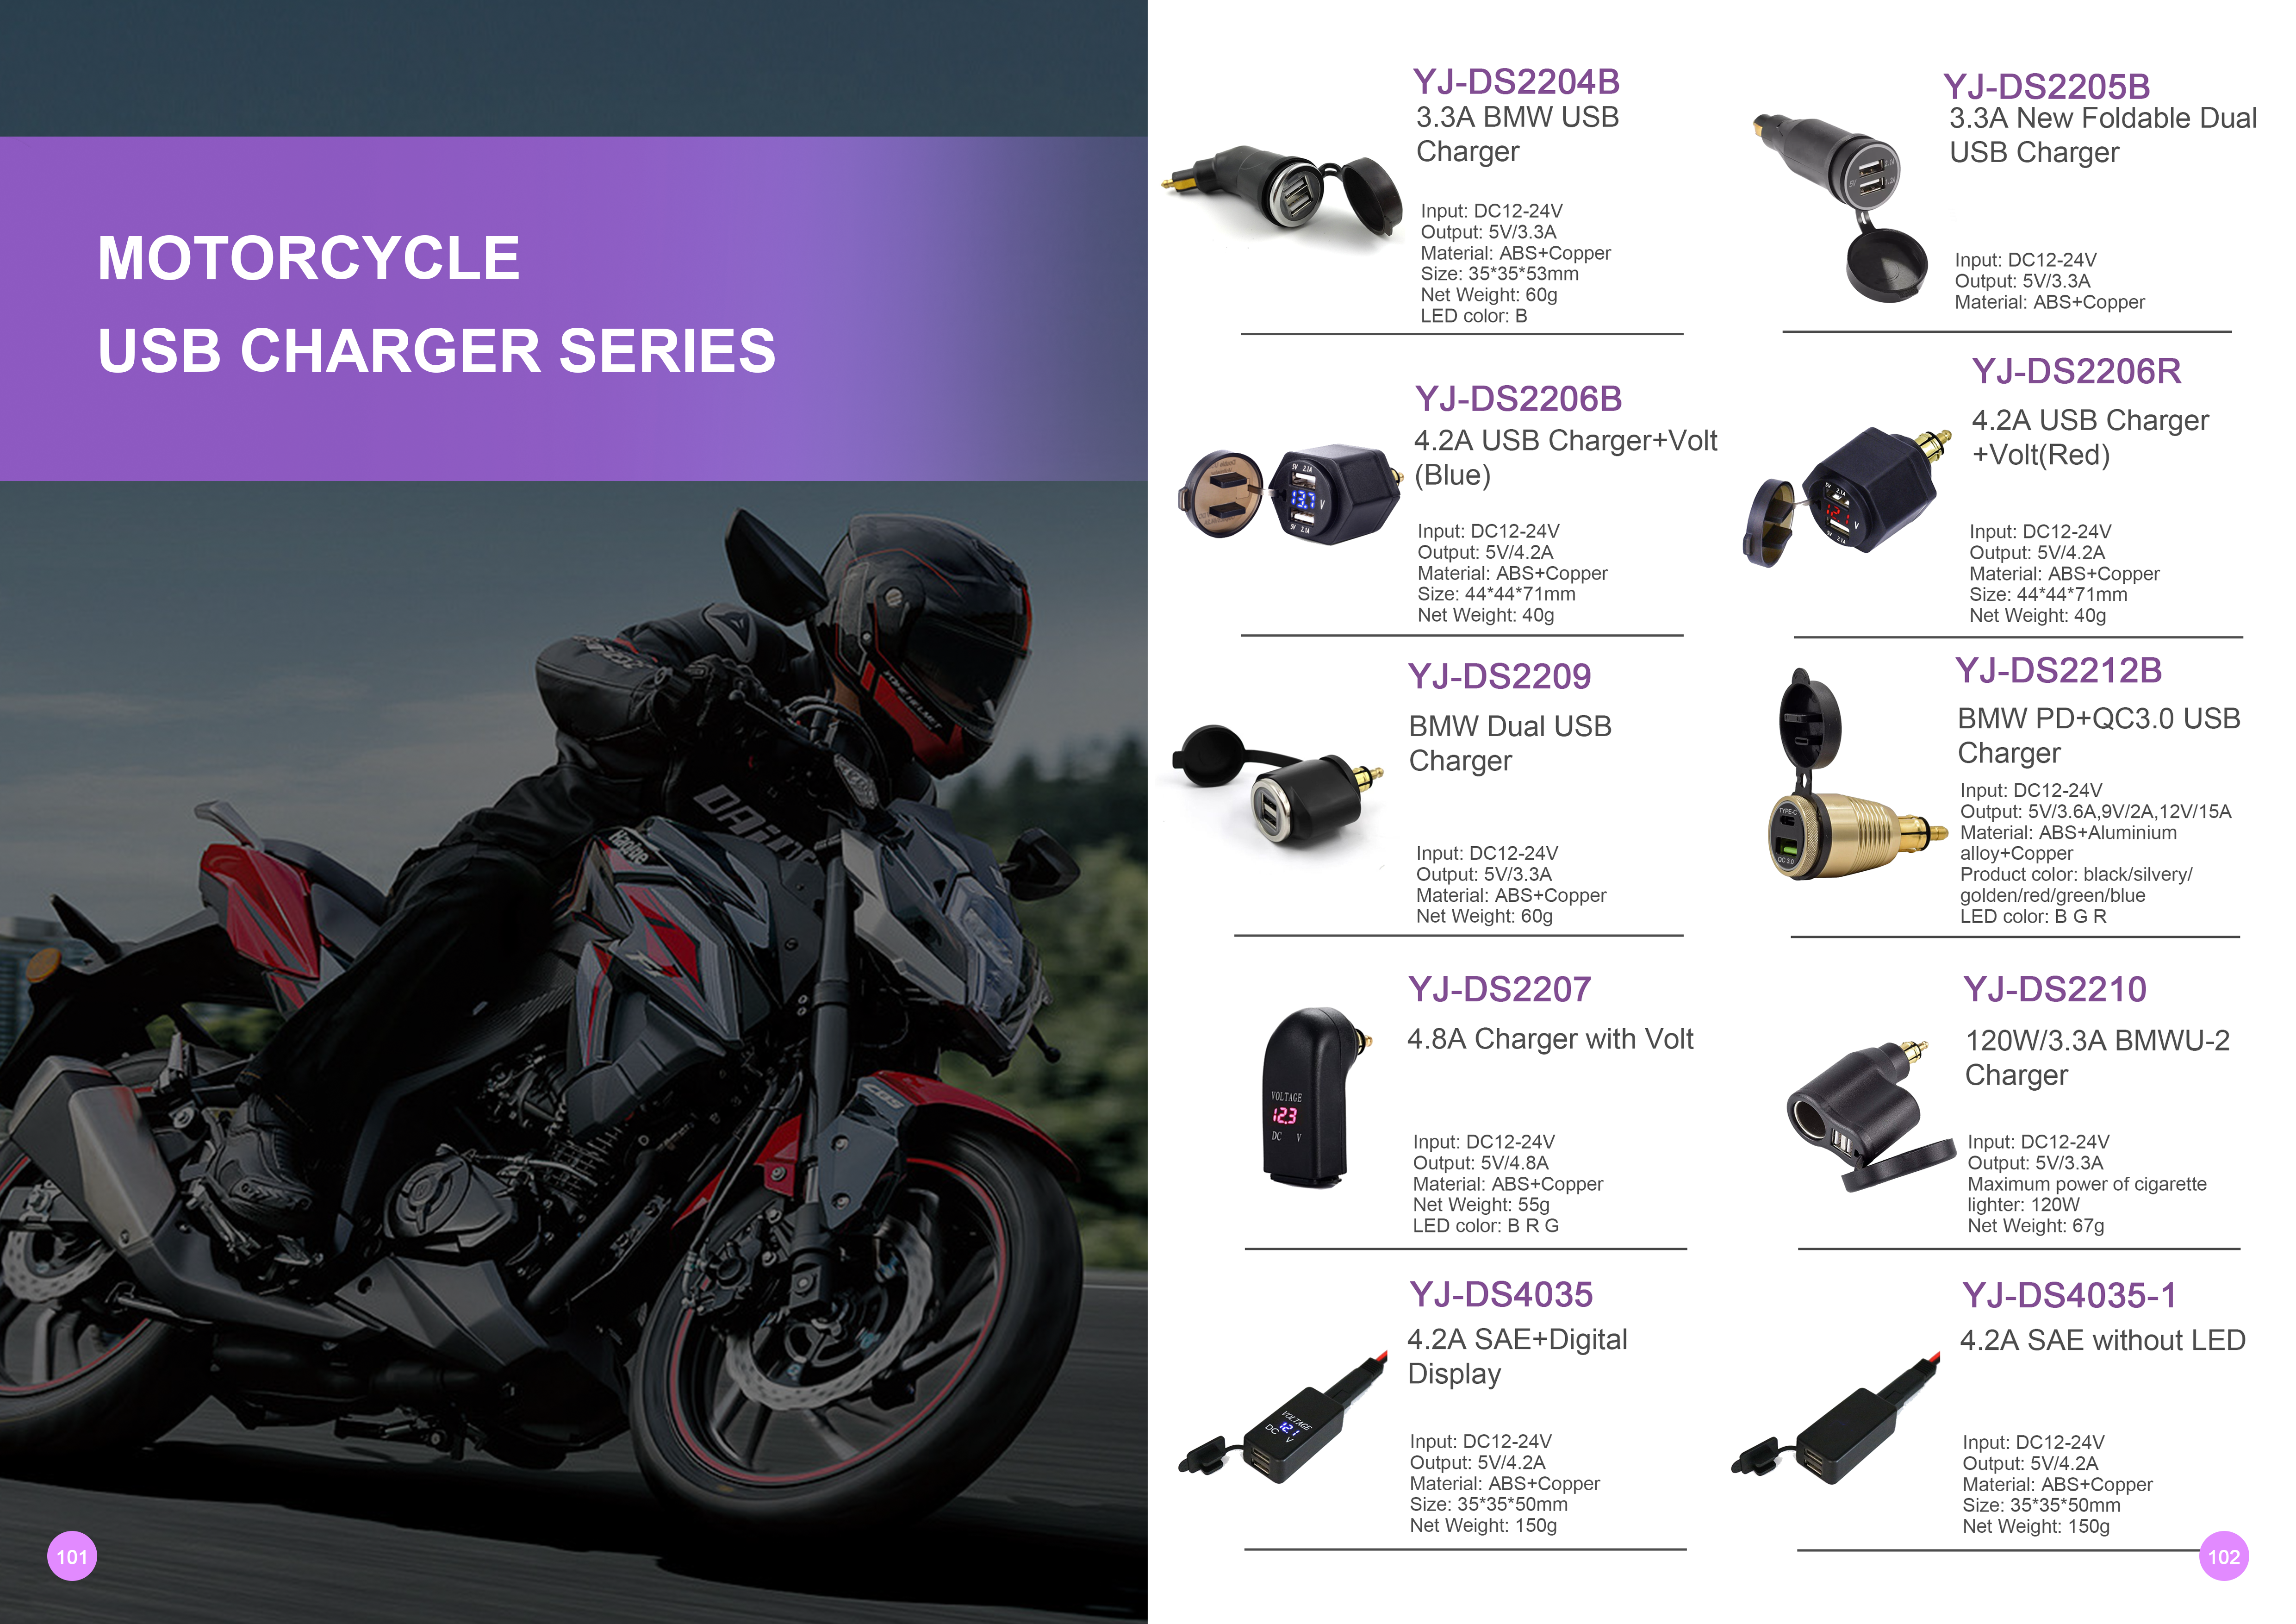 Motorcycle USB Charger series